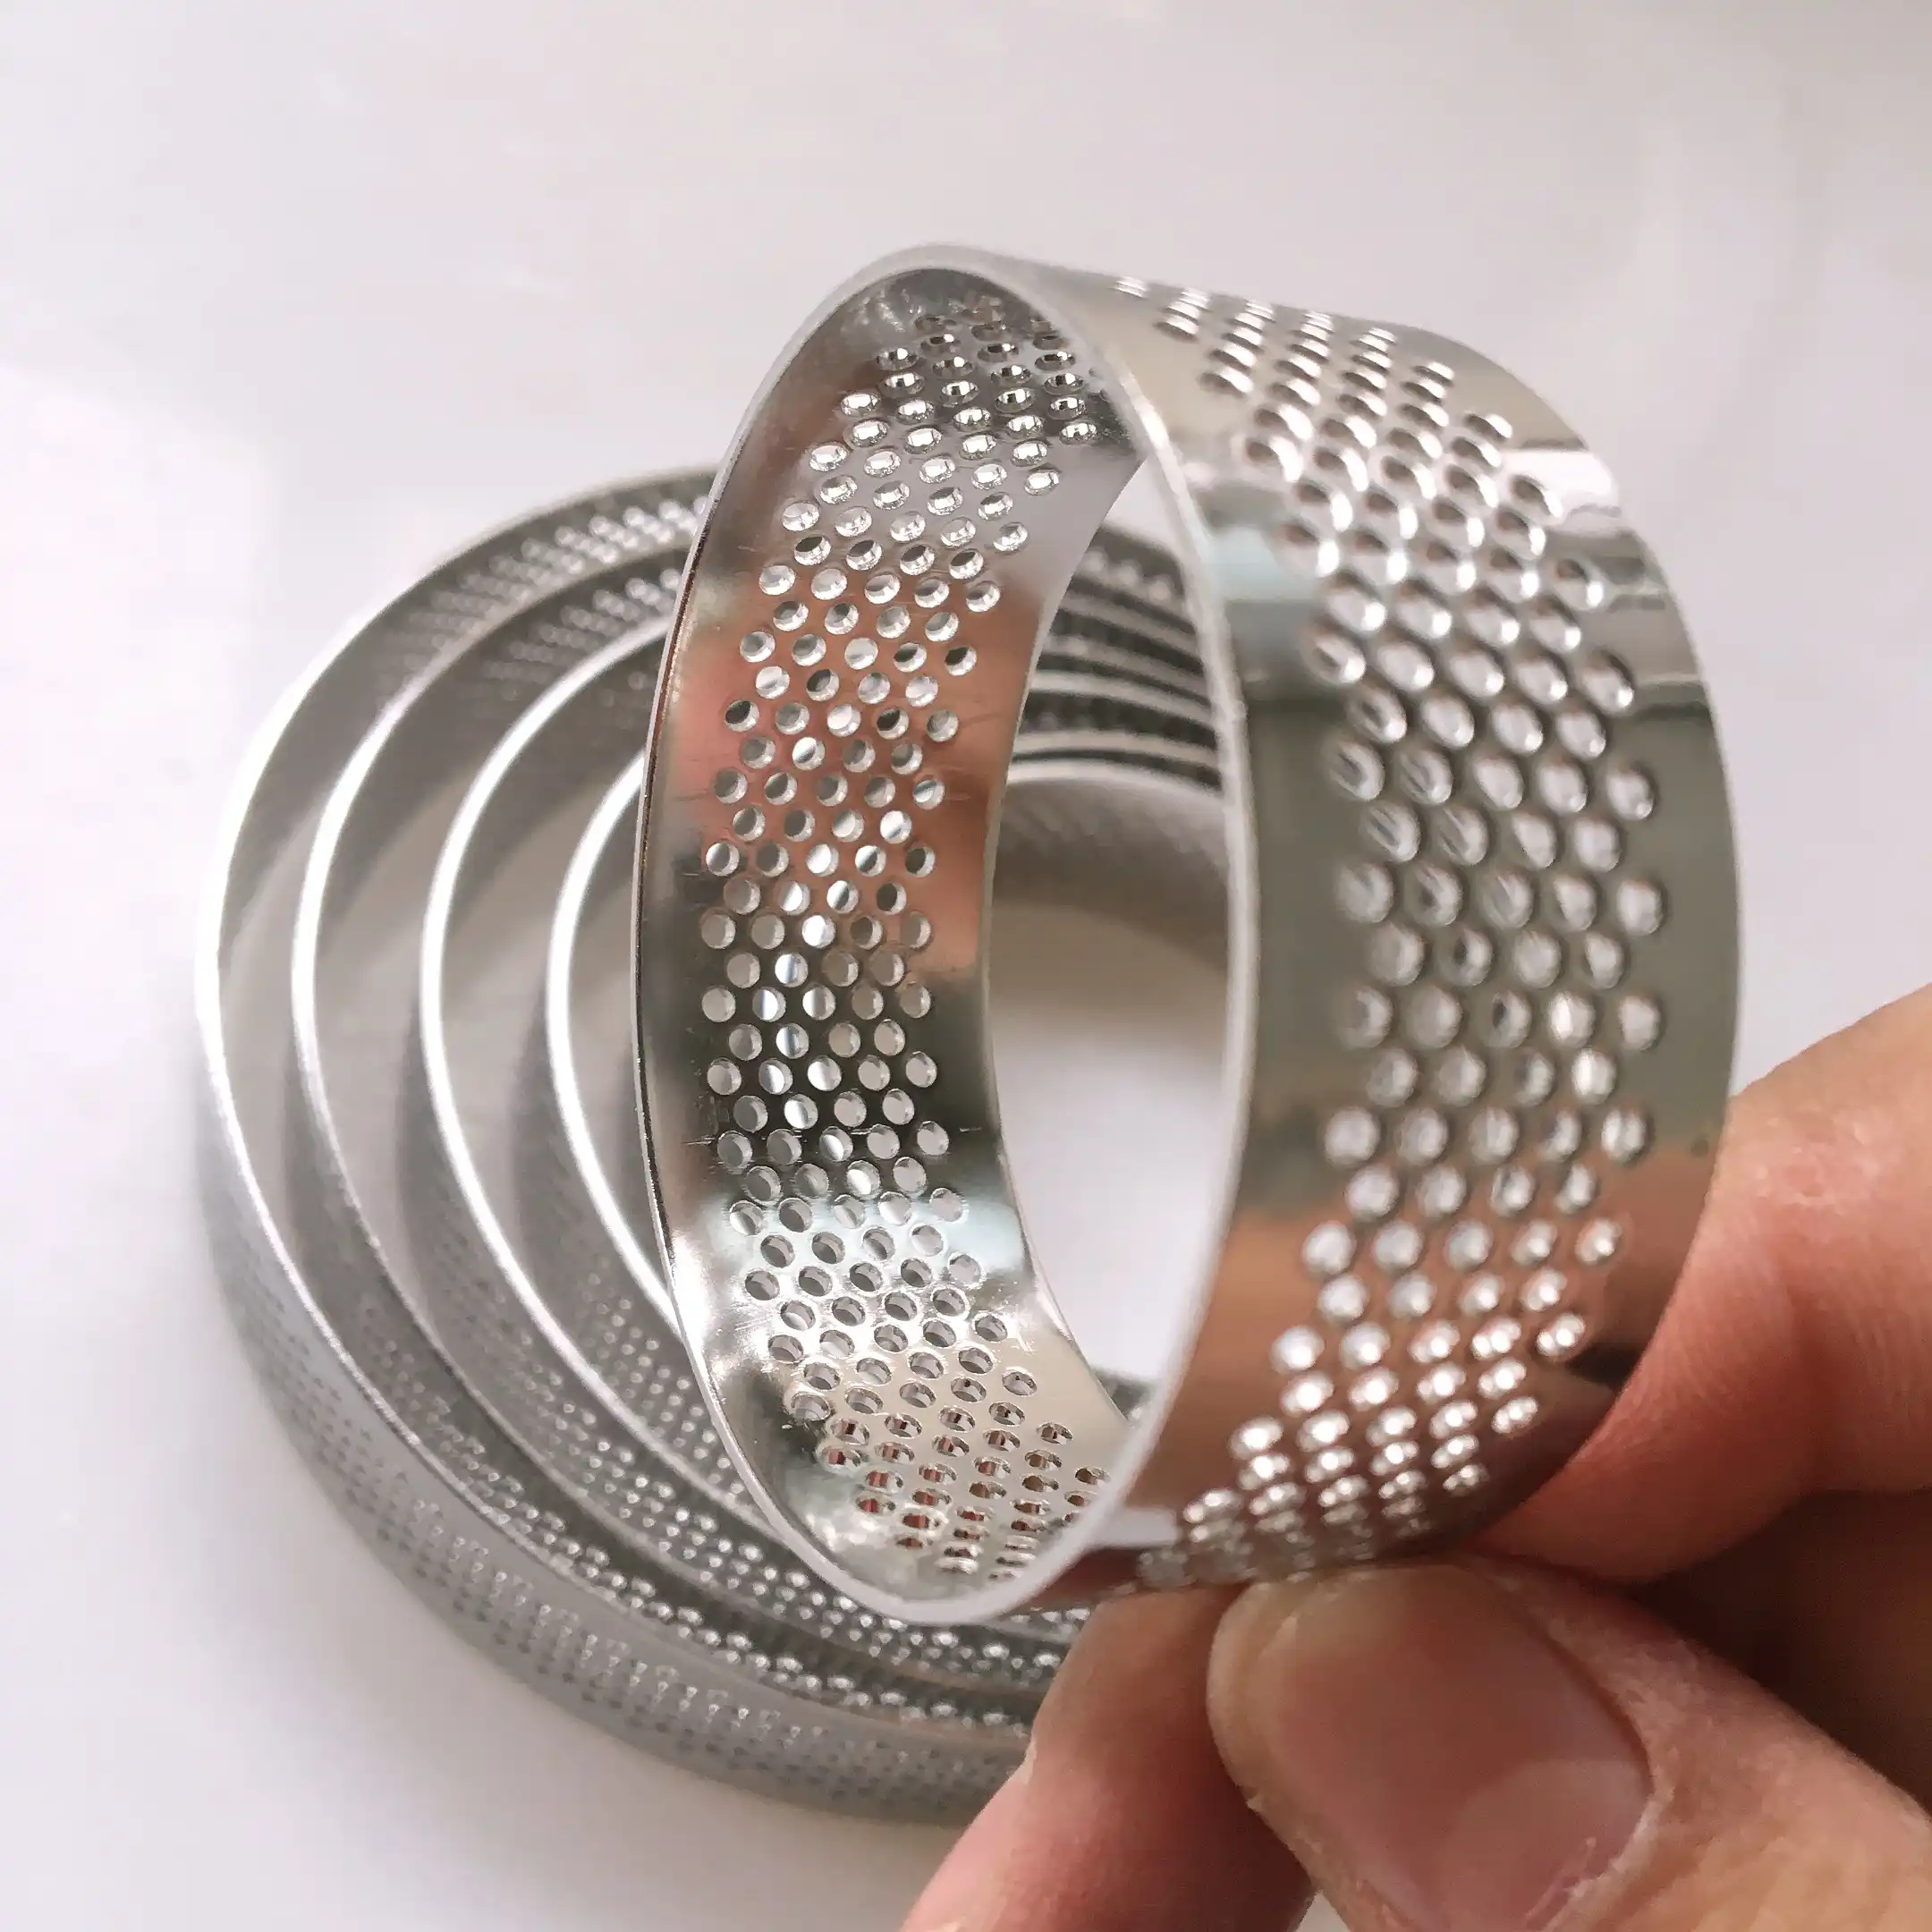 10pcs/lot 5cm 6cm 7cm 8cm 9cm 10cm 11cm 12cm Round stainless perforated